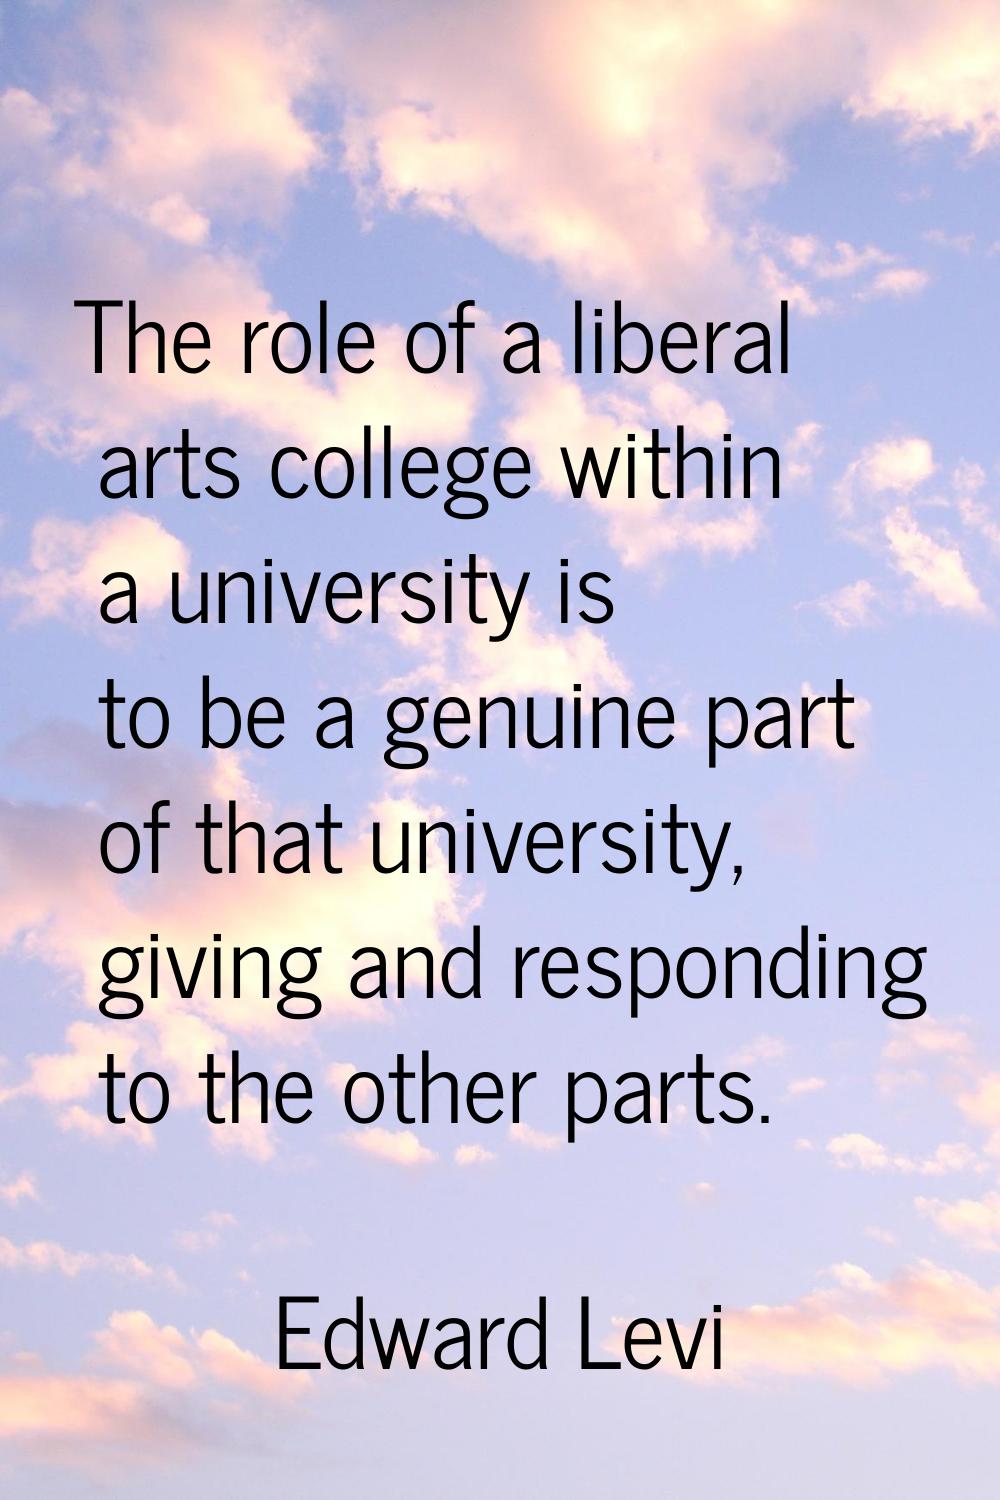 The role of a liberal arts college within a university is to be a genuine part of that university, 